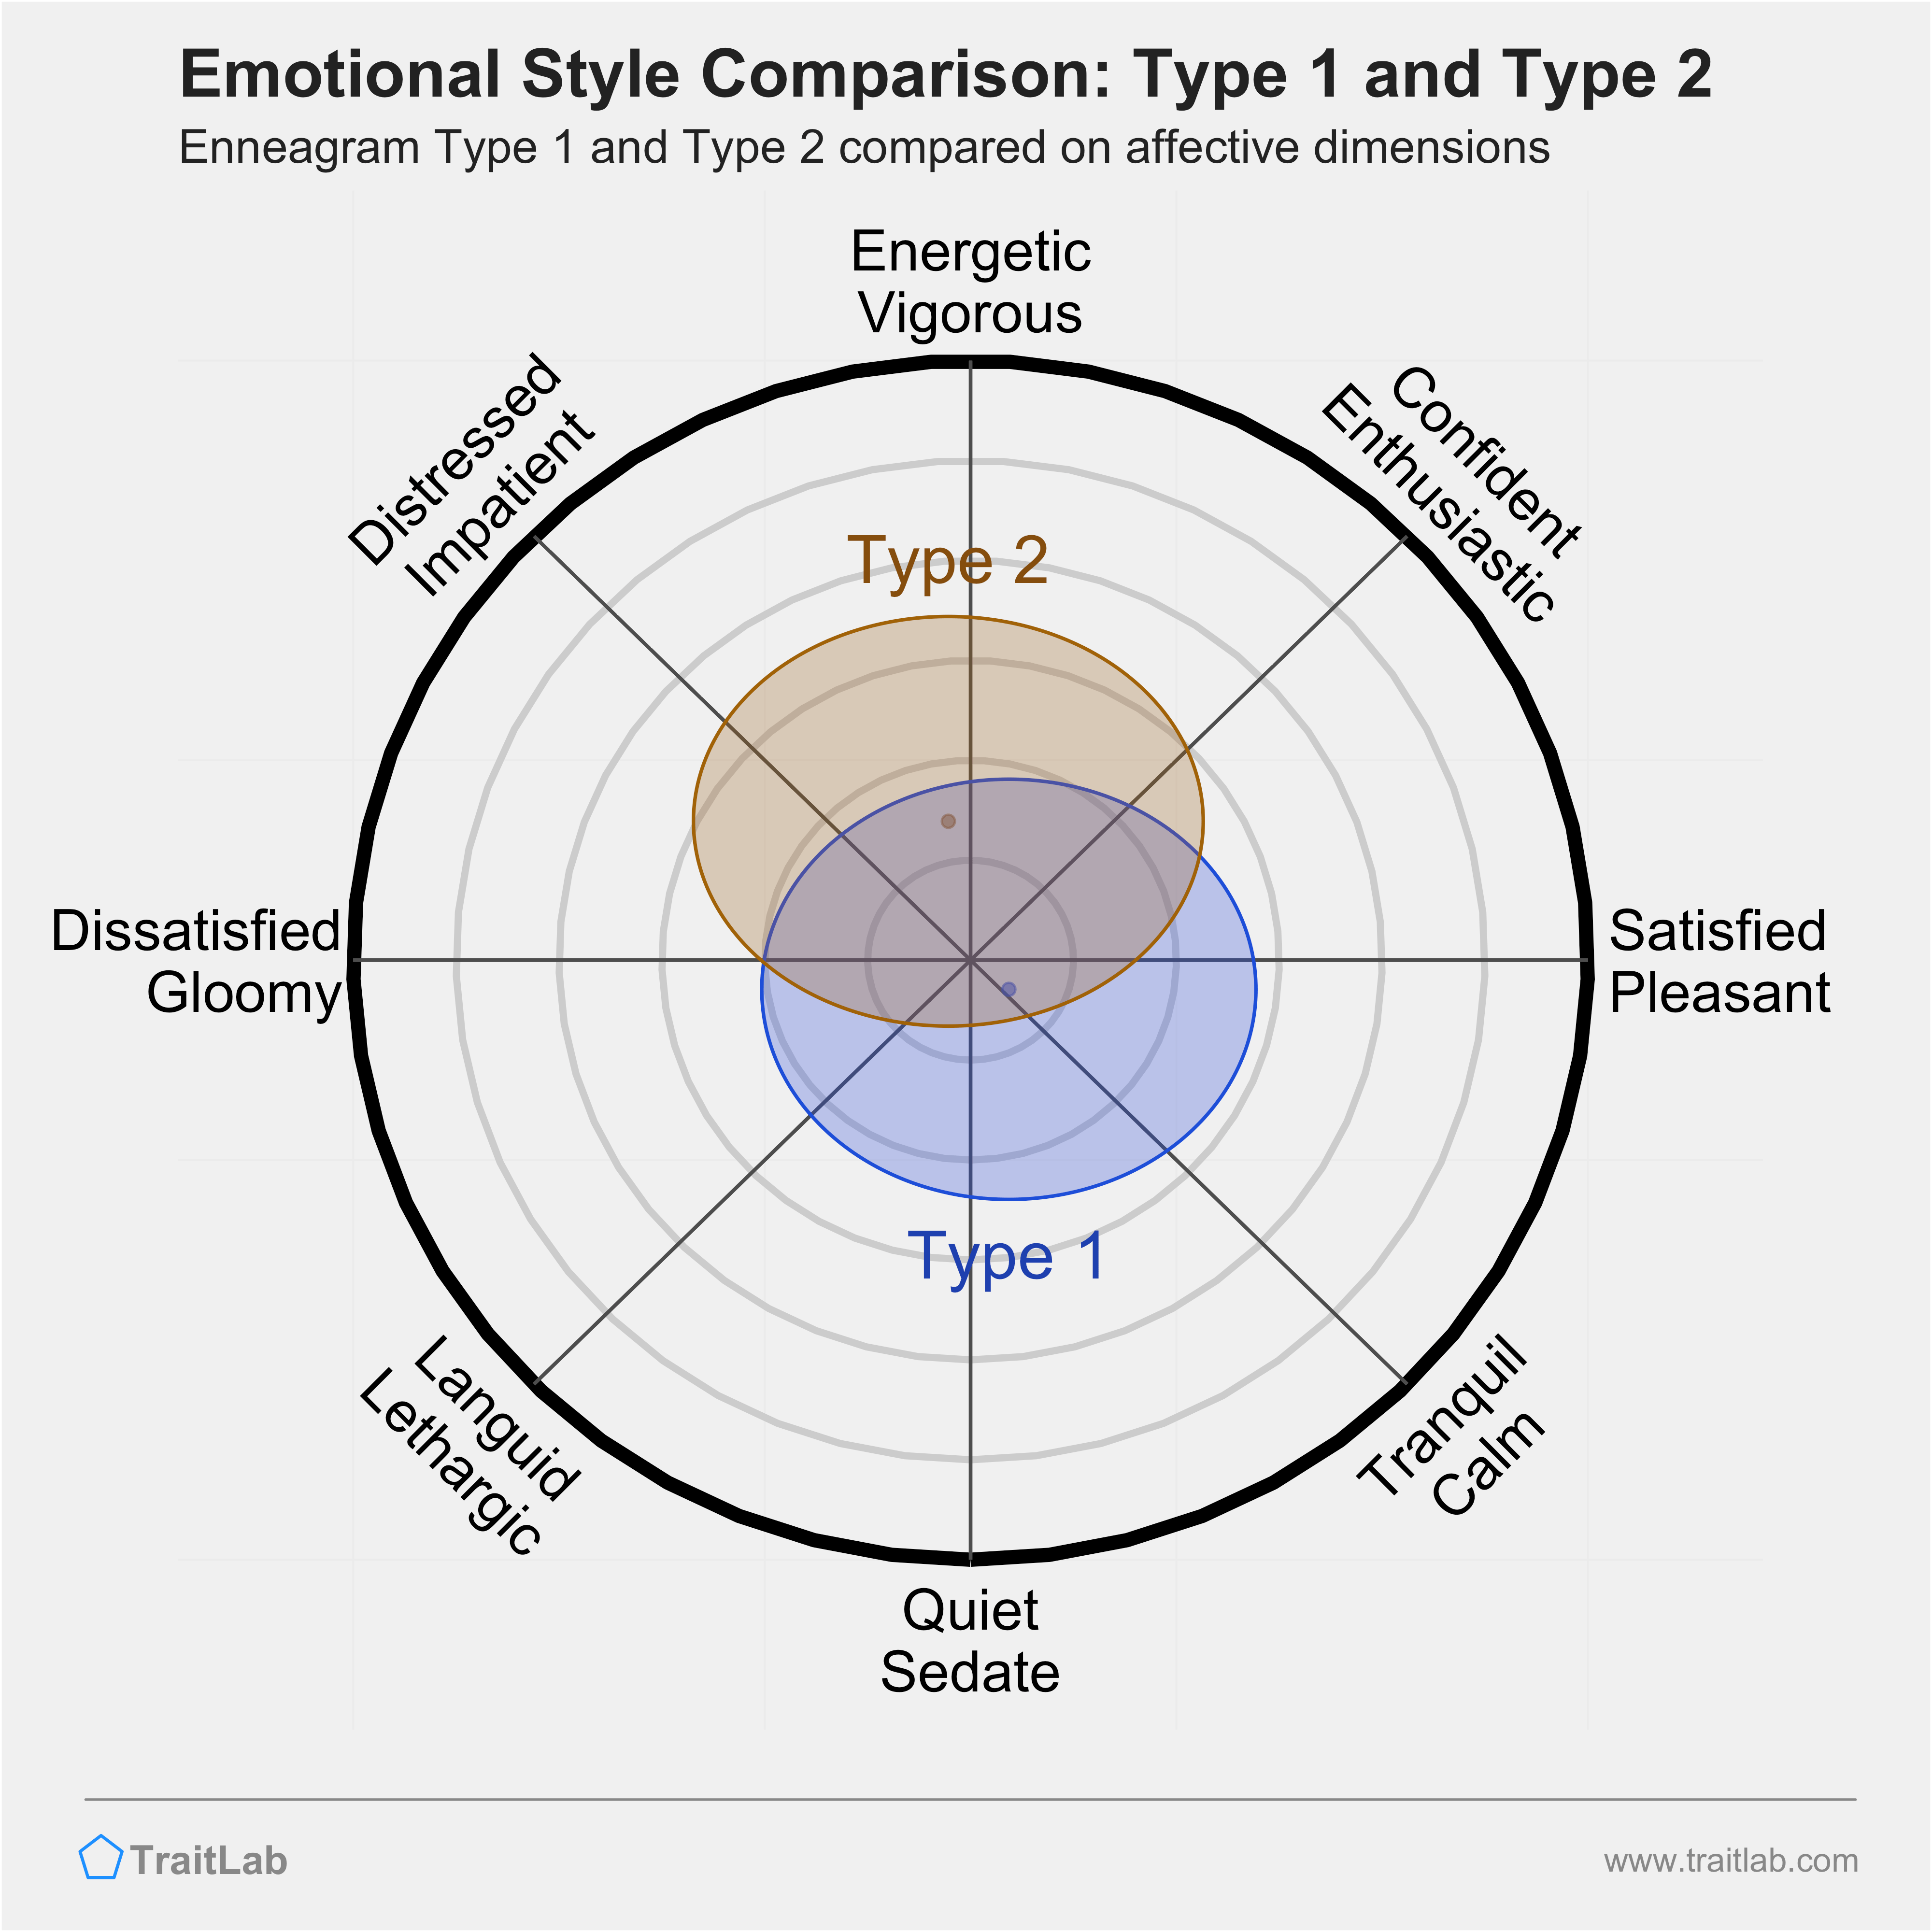 Type 1 and Type 2 comparison across emotional (affective) dimensions